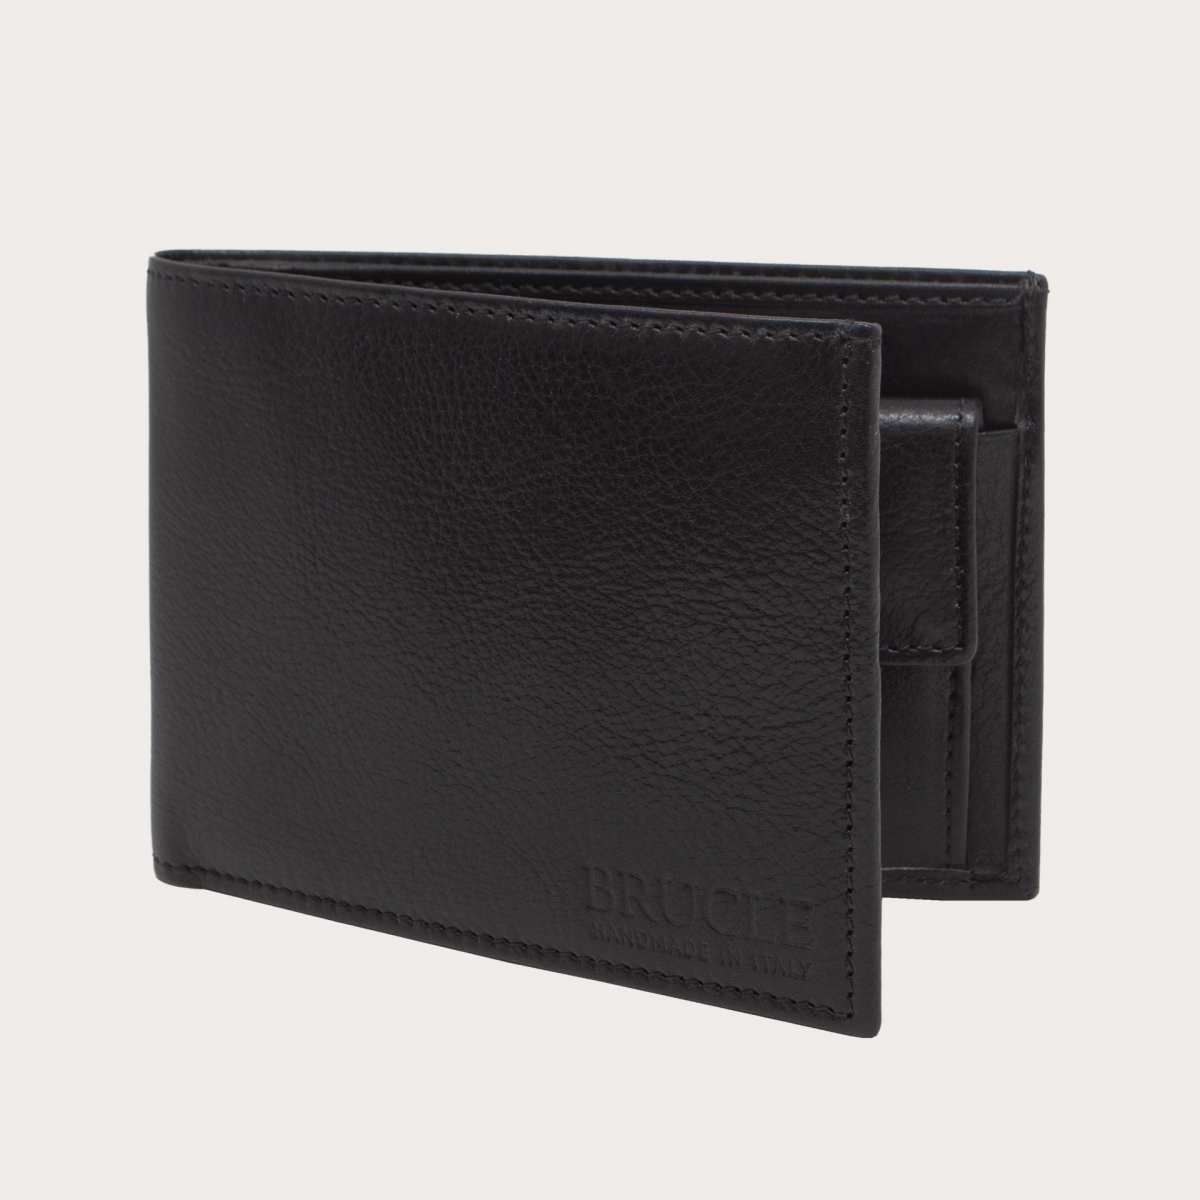 Brucle Men's bifold leather wallet with coin purse, black